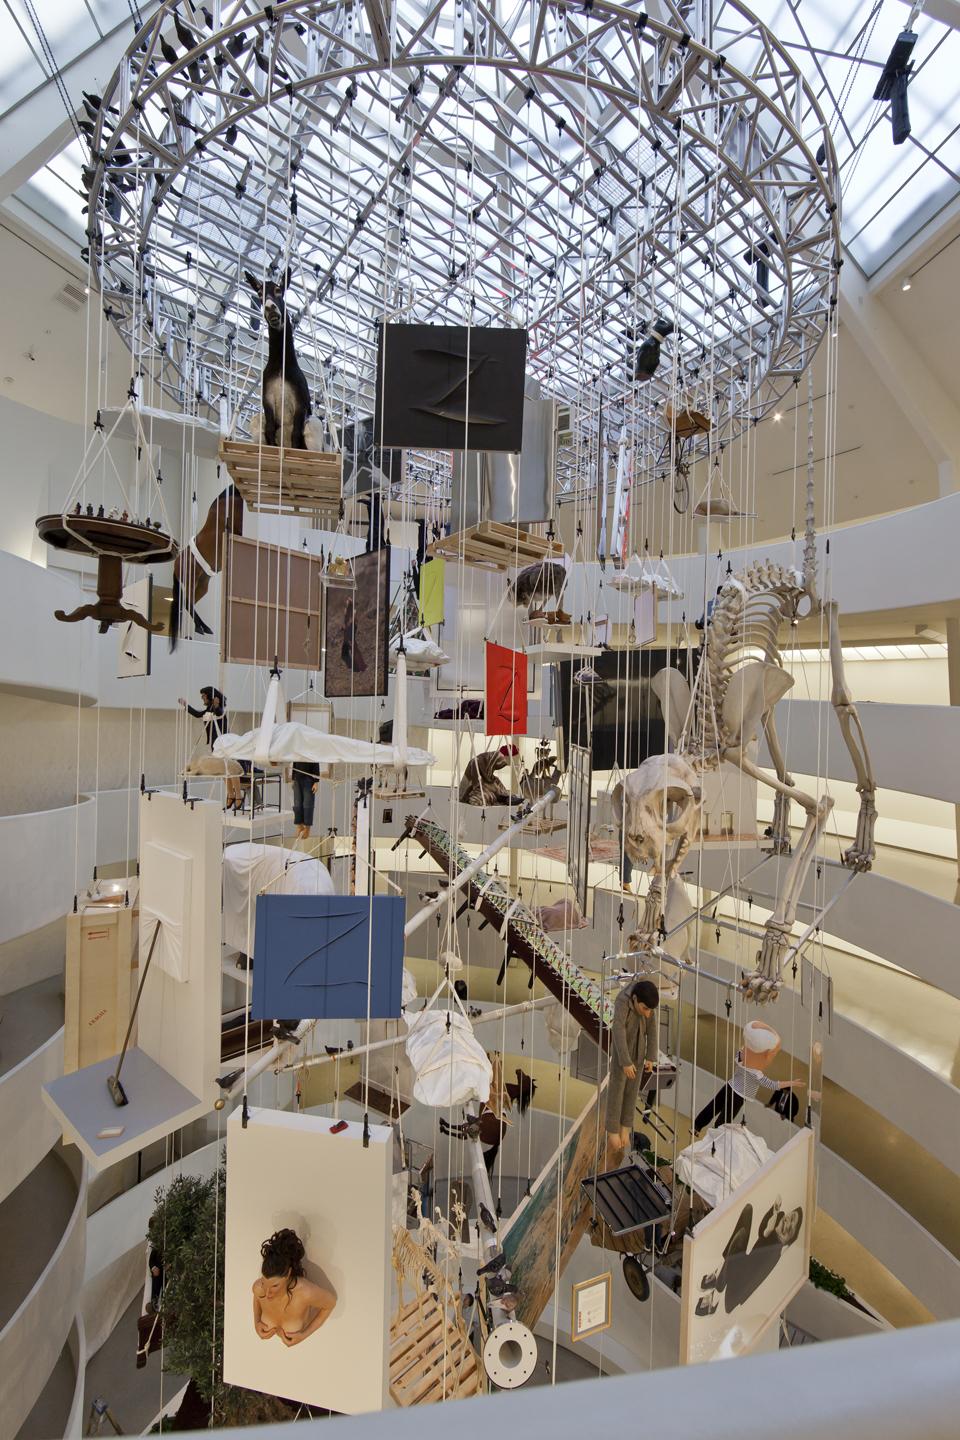 Installation view of the exhibition <i>Maurizio Cattelan: All</i> at the Solomon R. Guggenheim Museum. Photo David Heald © Solomon R. Guggenheim Foundation.